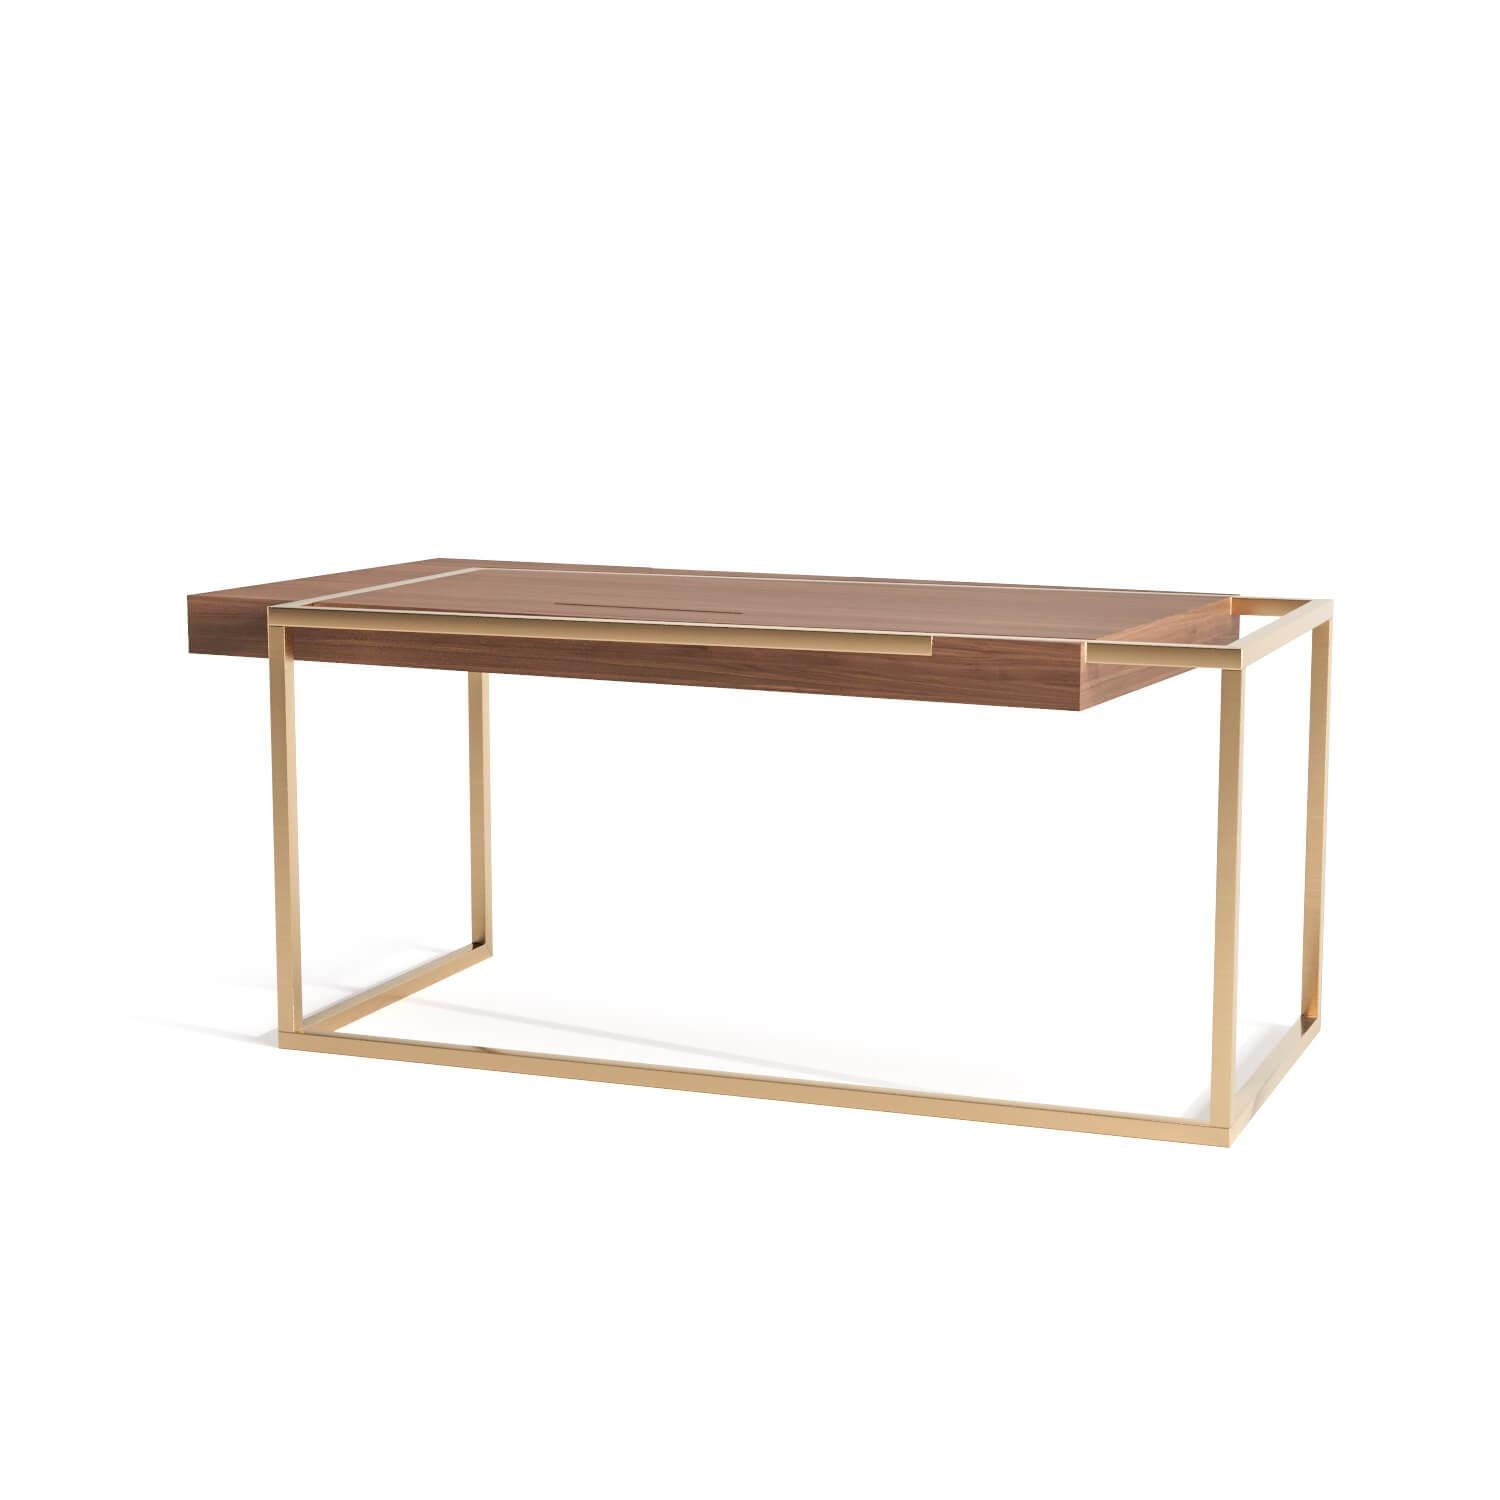 The Moderns Home Office Accent Writing Executive Desk Walnut Wood and Brushed Brass (en anglais) en vente 9